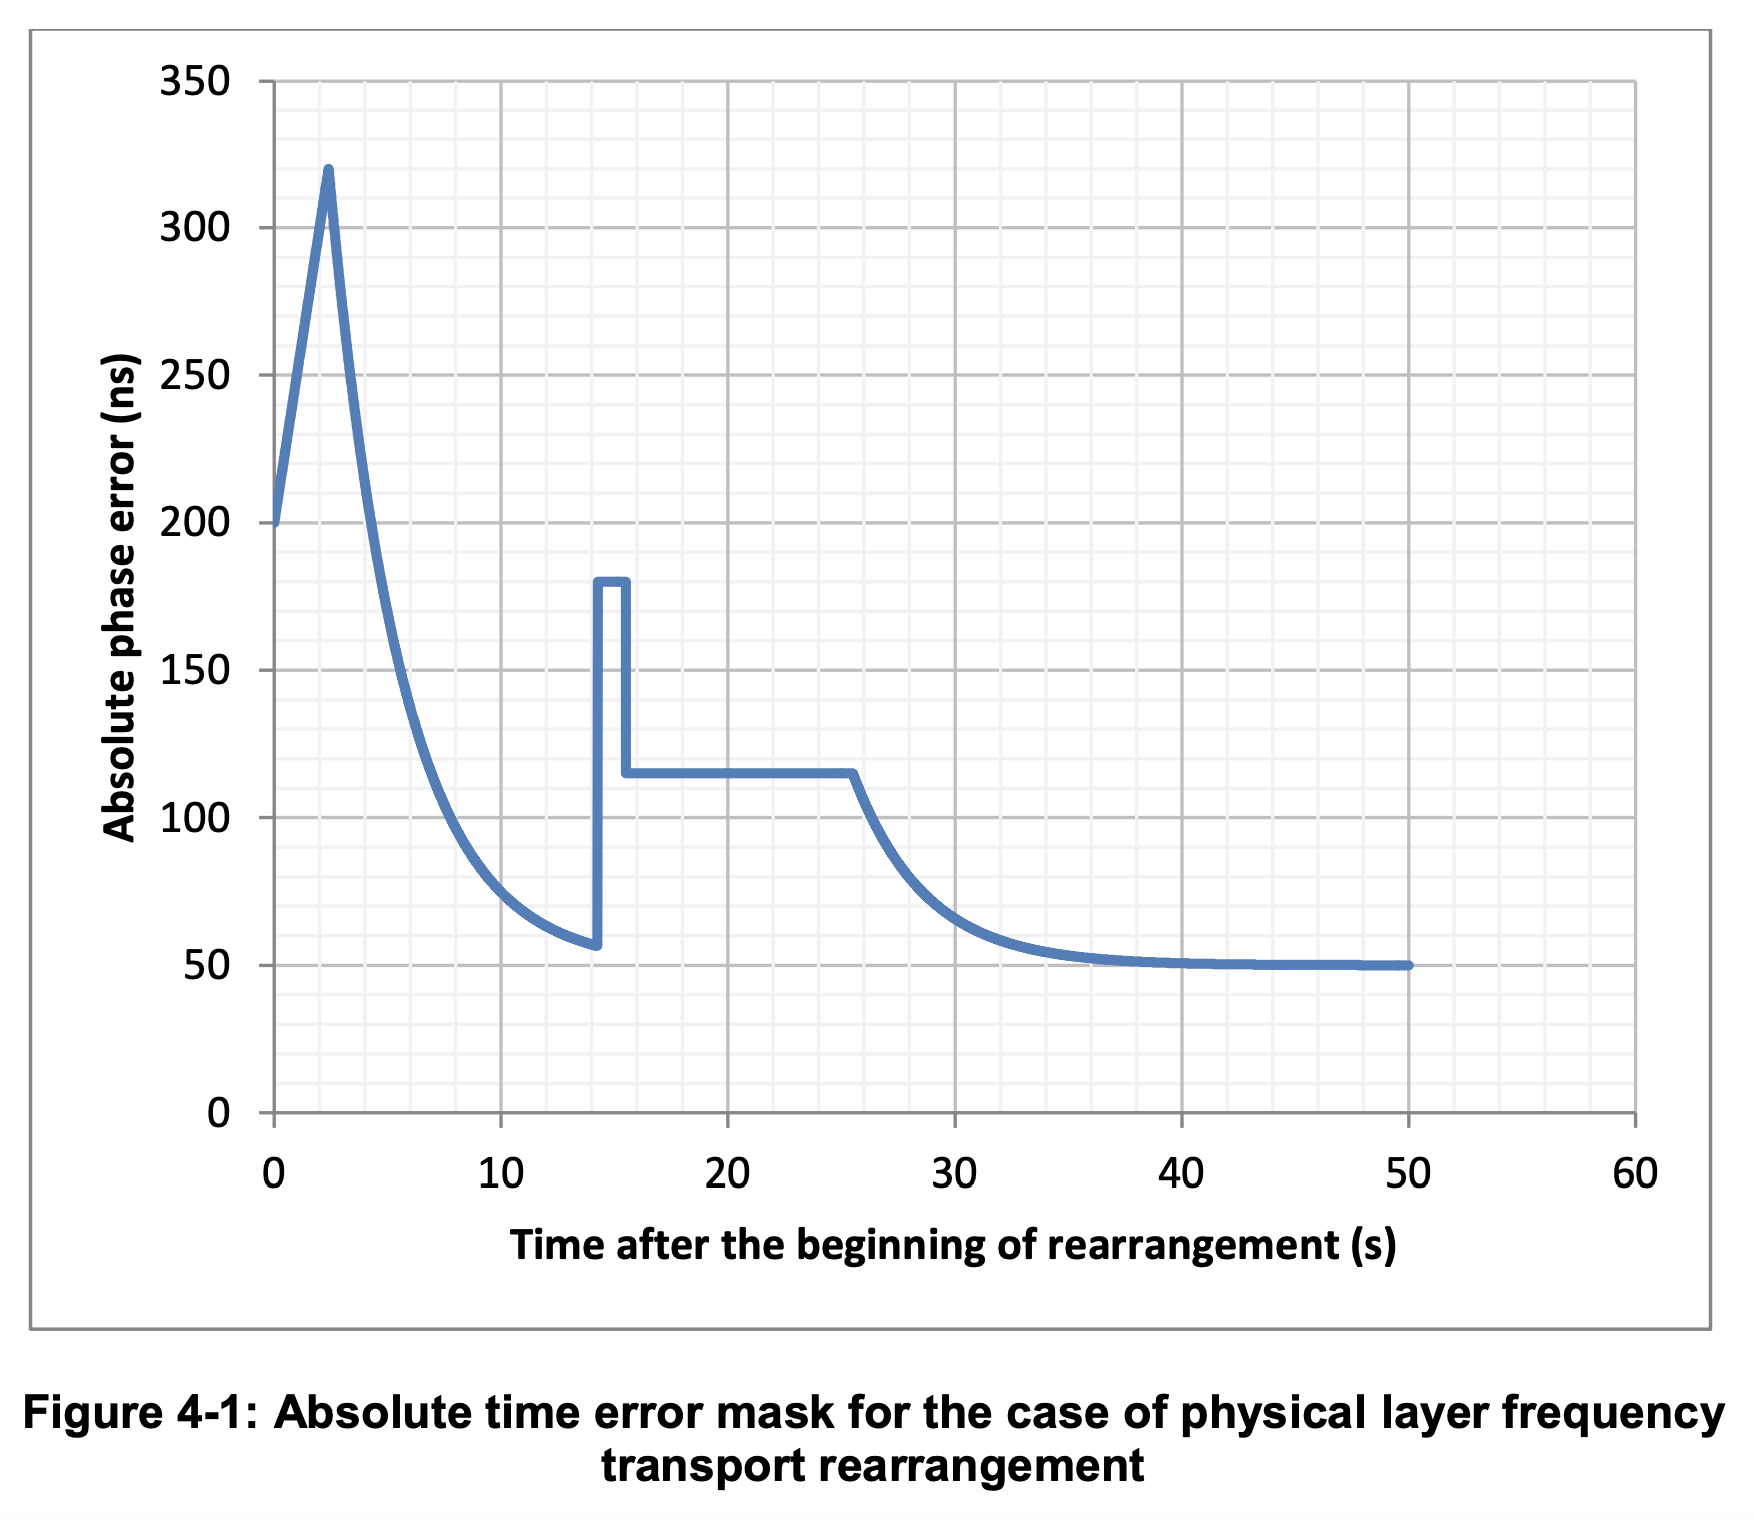 Figure 4-1 Absolute time error mask for the case of physical layer frequency transport rearrangement